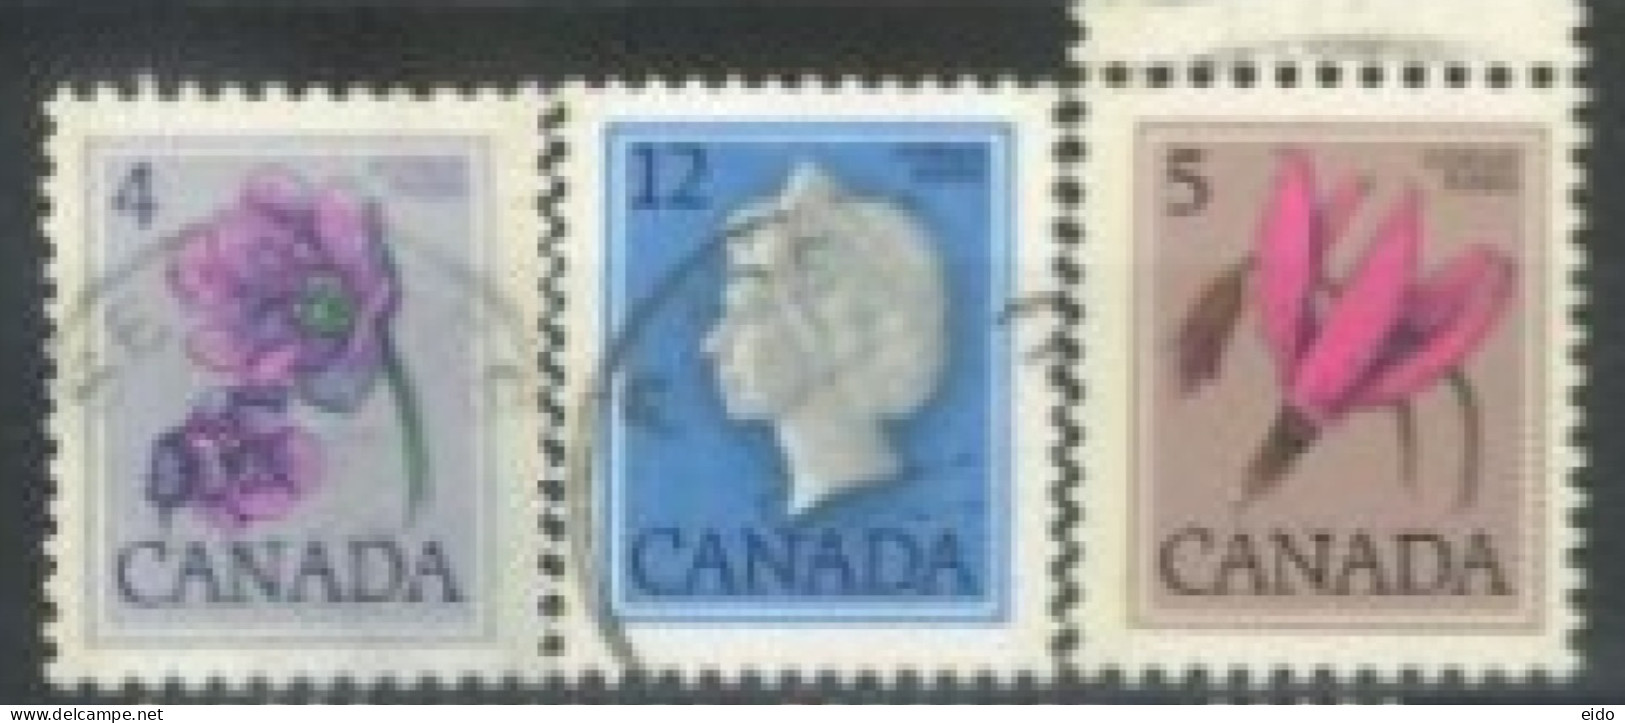 CANADA - 1977, QUEEN ELIZABETH II, & FLOWERS STAMPS SET OF 3, USED. - Usados